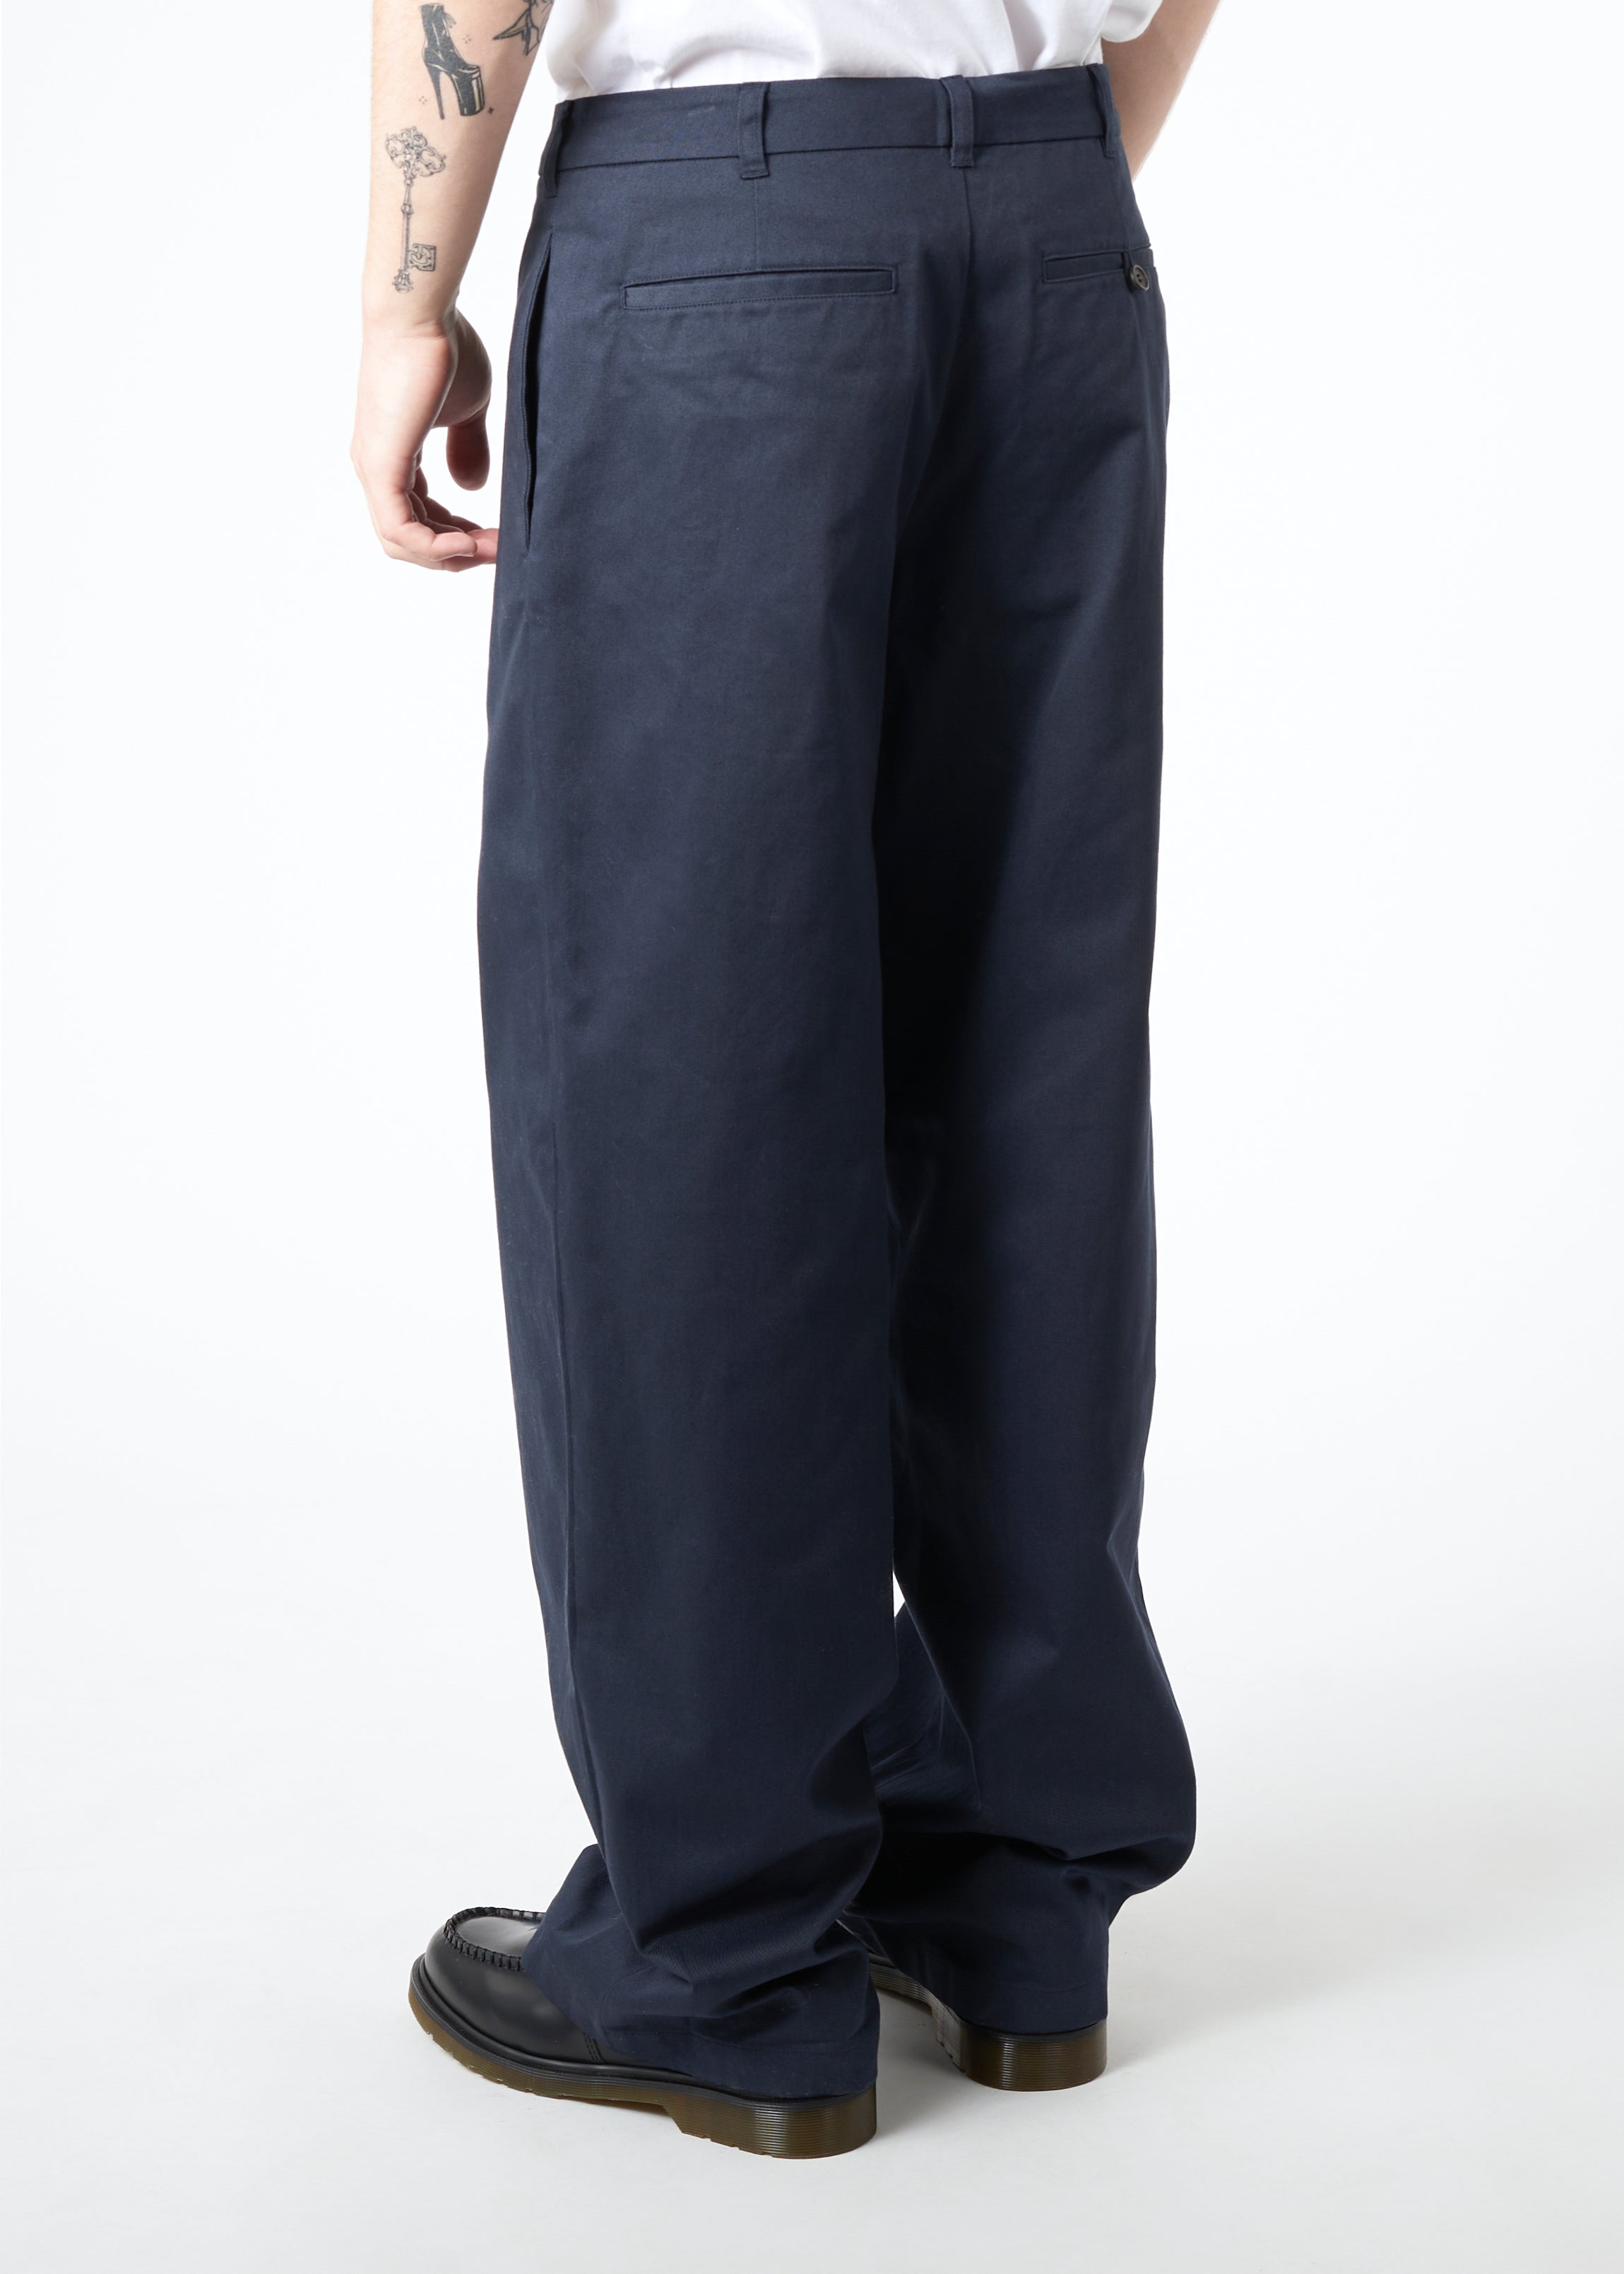 Twill Chino Trousers - Regular Fit